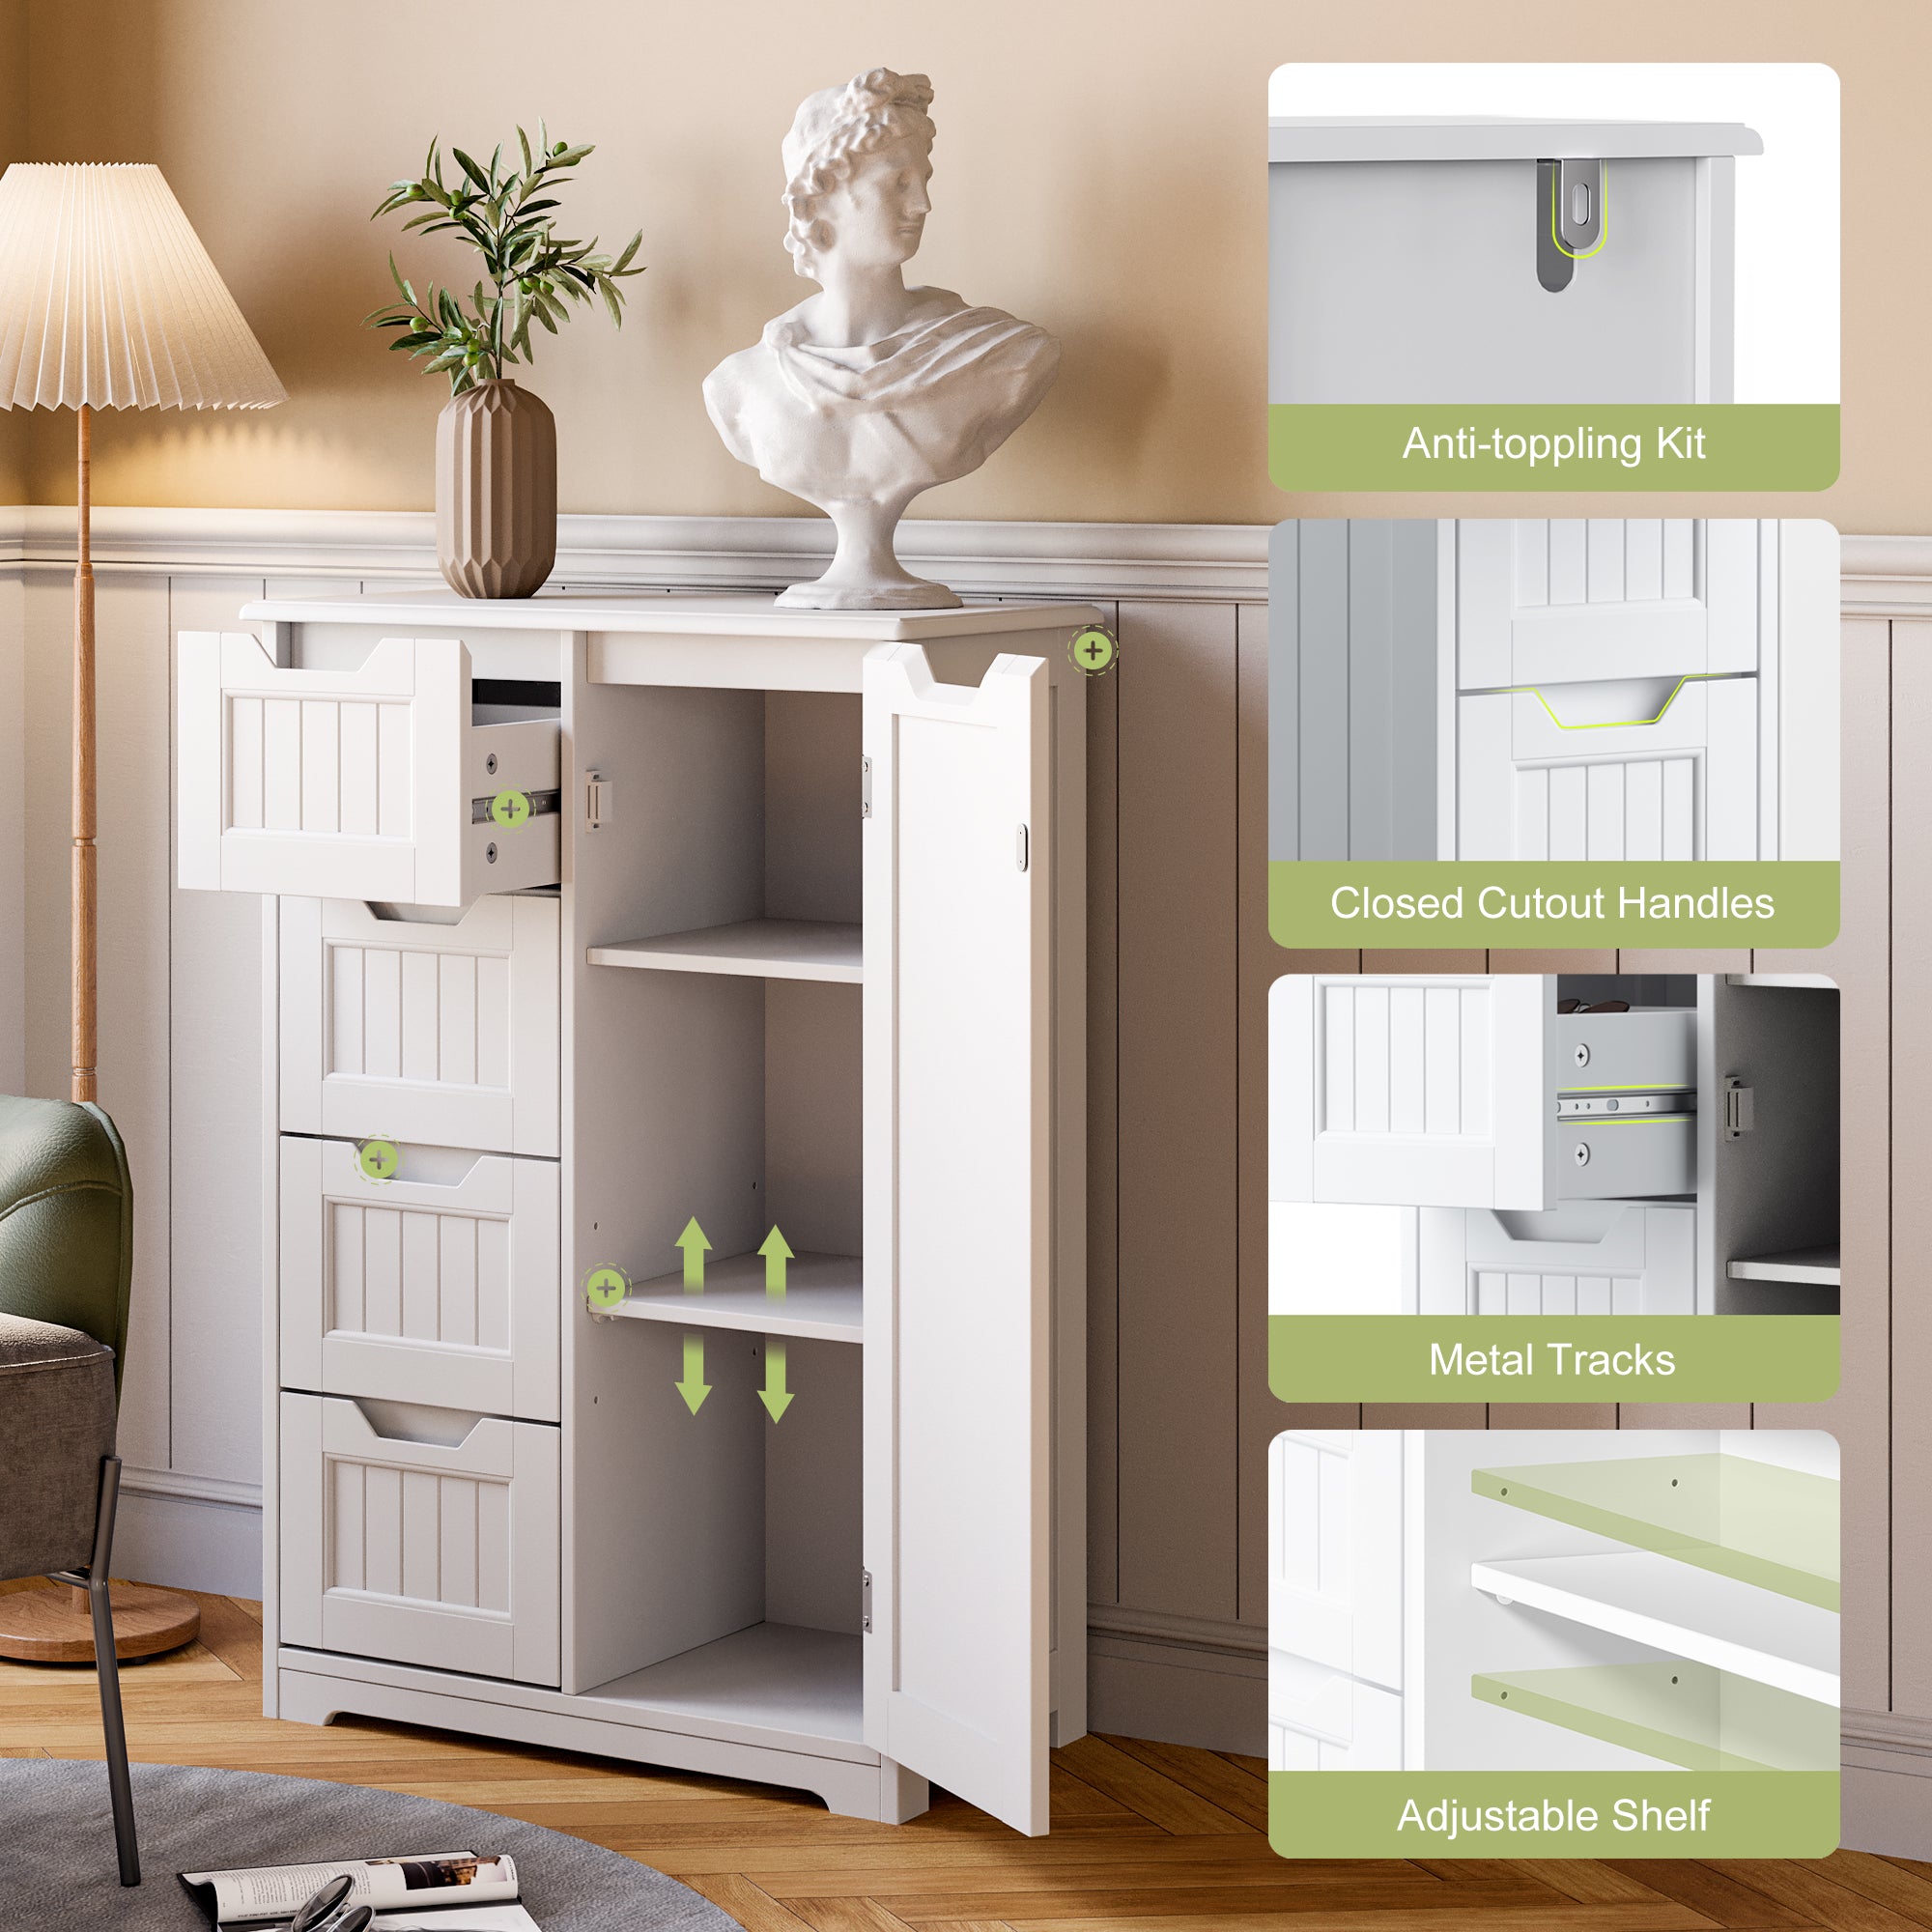 Gizoon AP26 White Modern Pantry Storage Cabinet with Door and Shelves